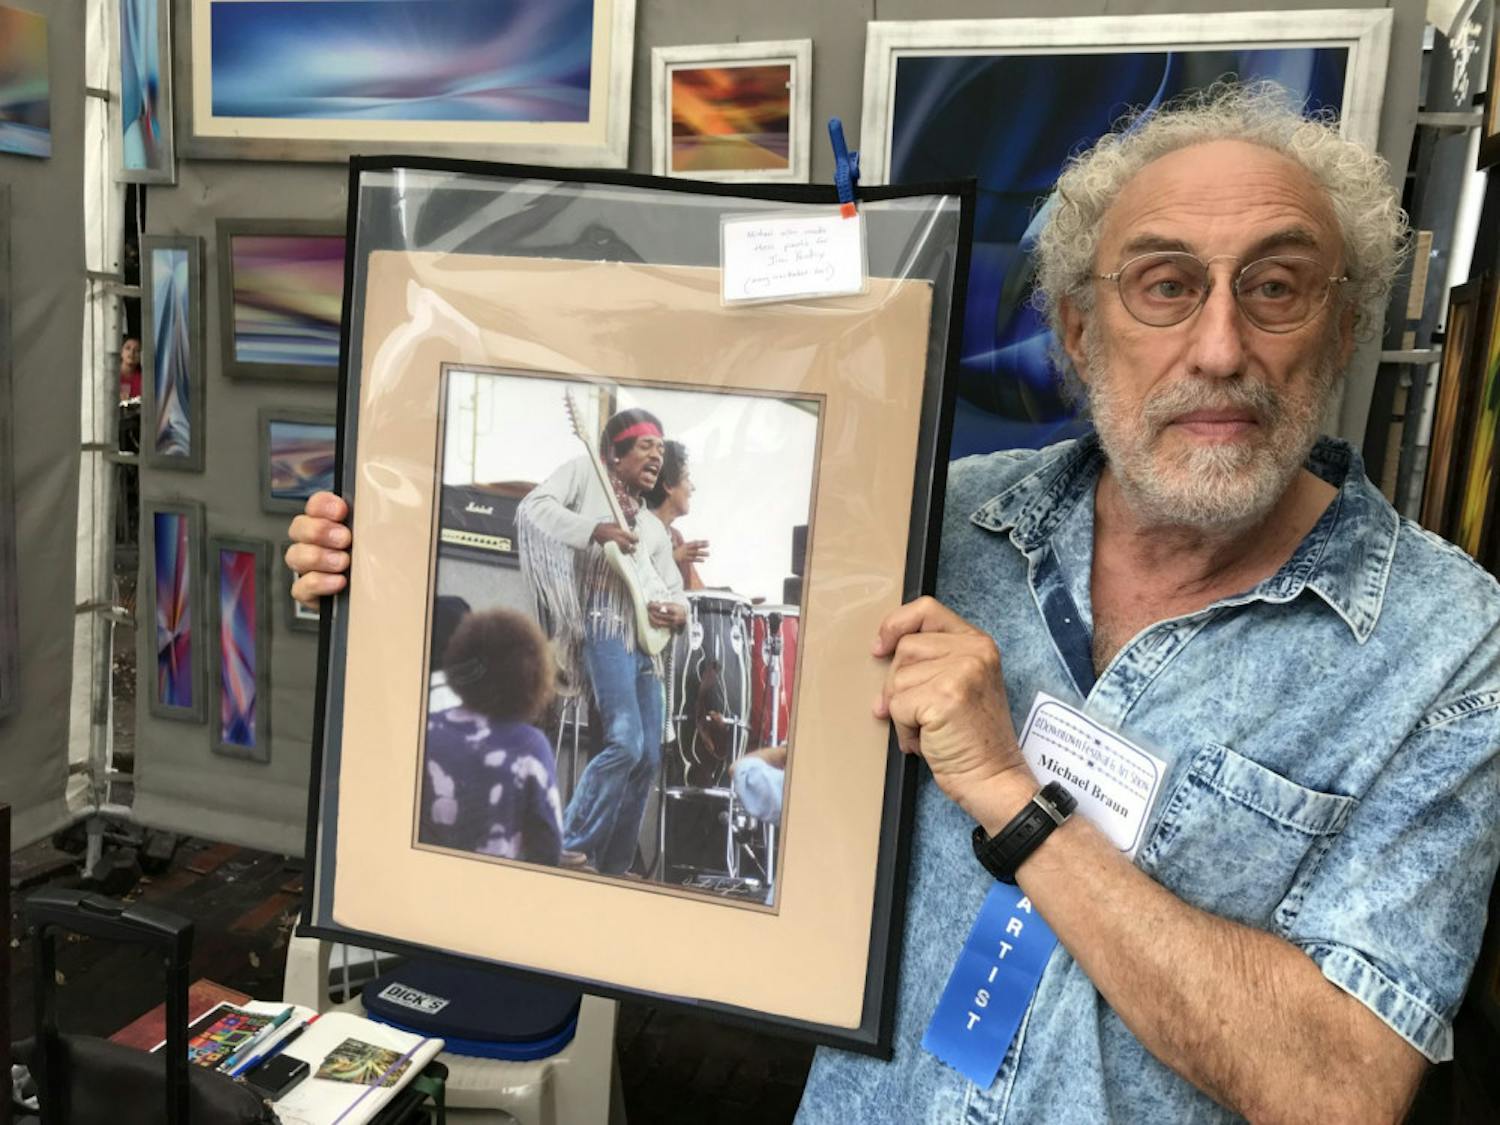 Michael Braun, an artist at the 37th Annual Downtown Festival &amp; Art Show, holds a picture of Jimi Hendrix wearing clothes Braun designed at Woodstock.
&nbsp;